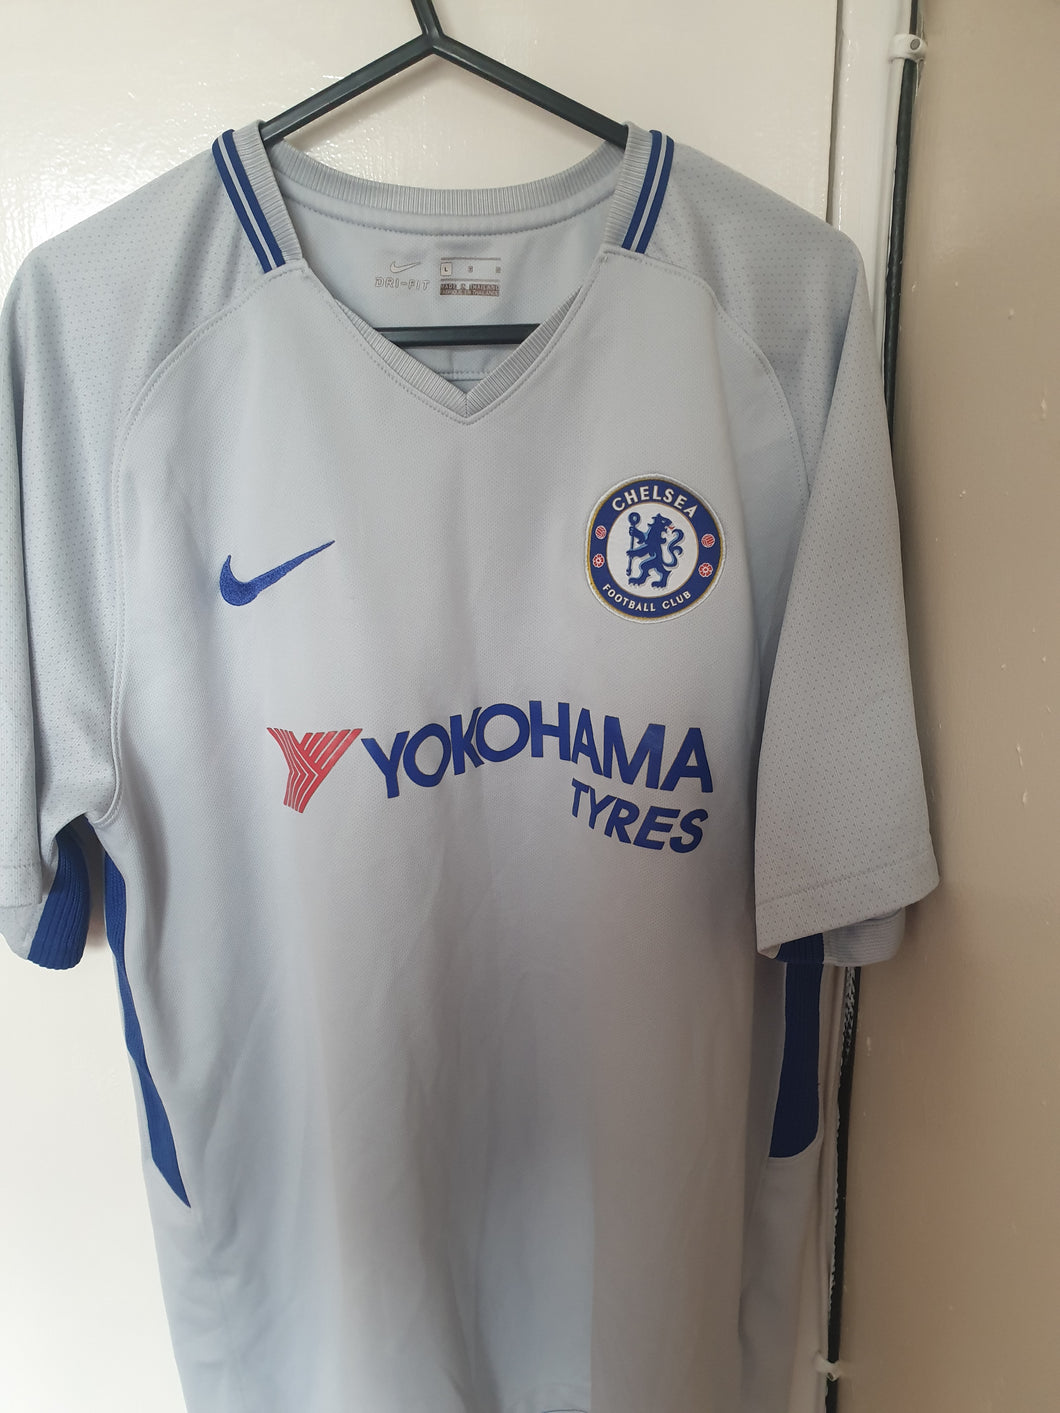 Chelsea Fc 2017-18 Away Shirt (Size Large)